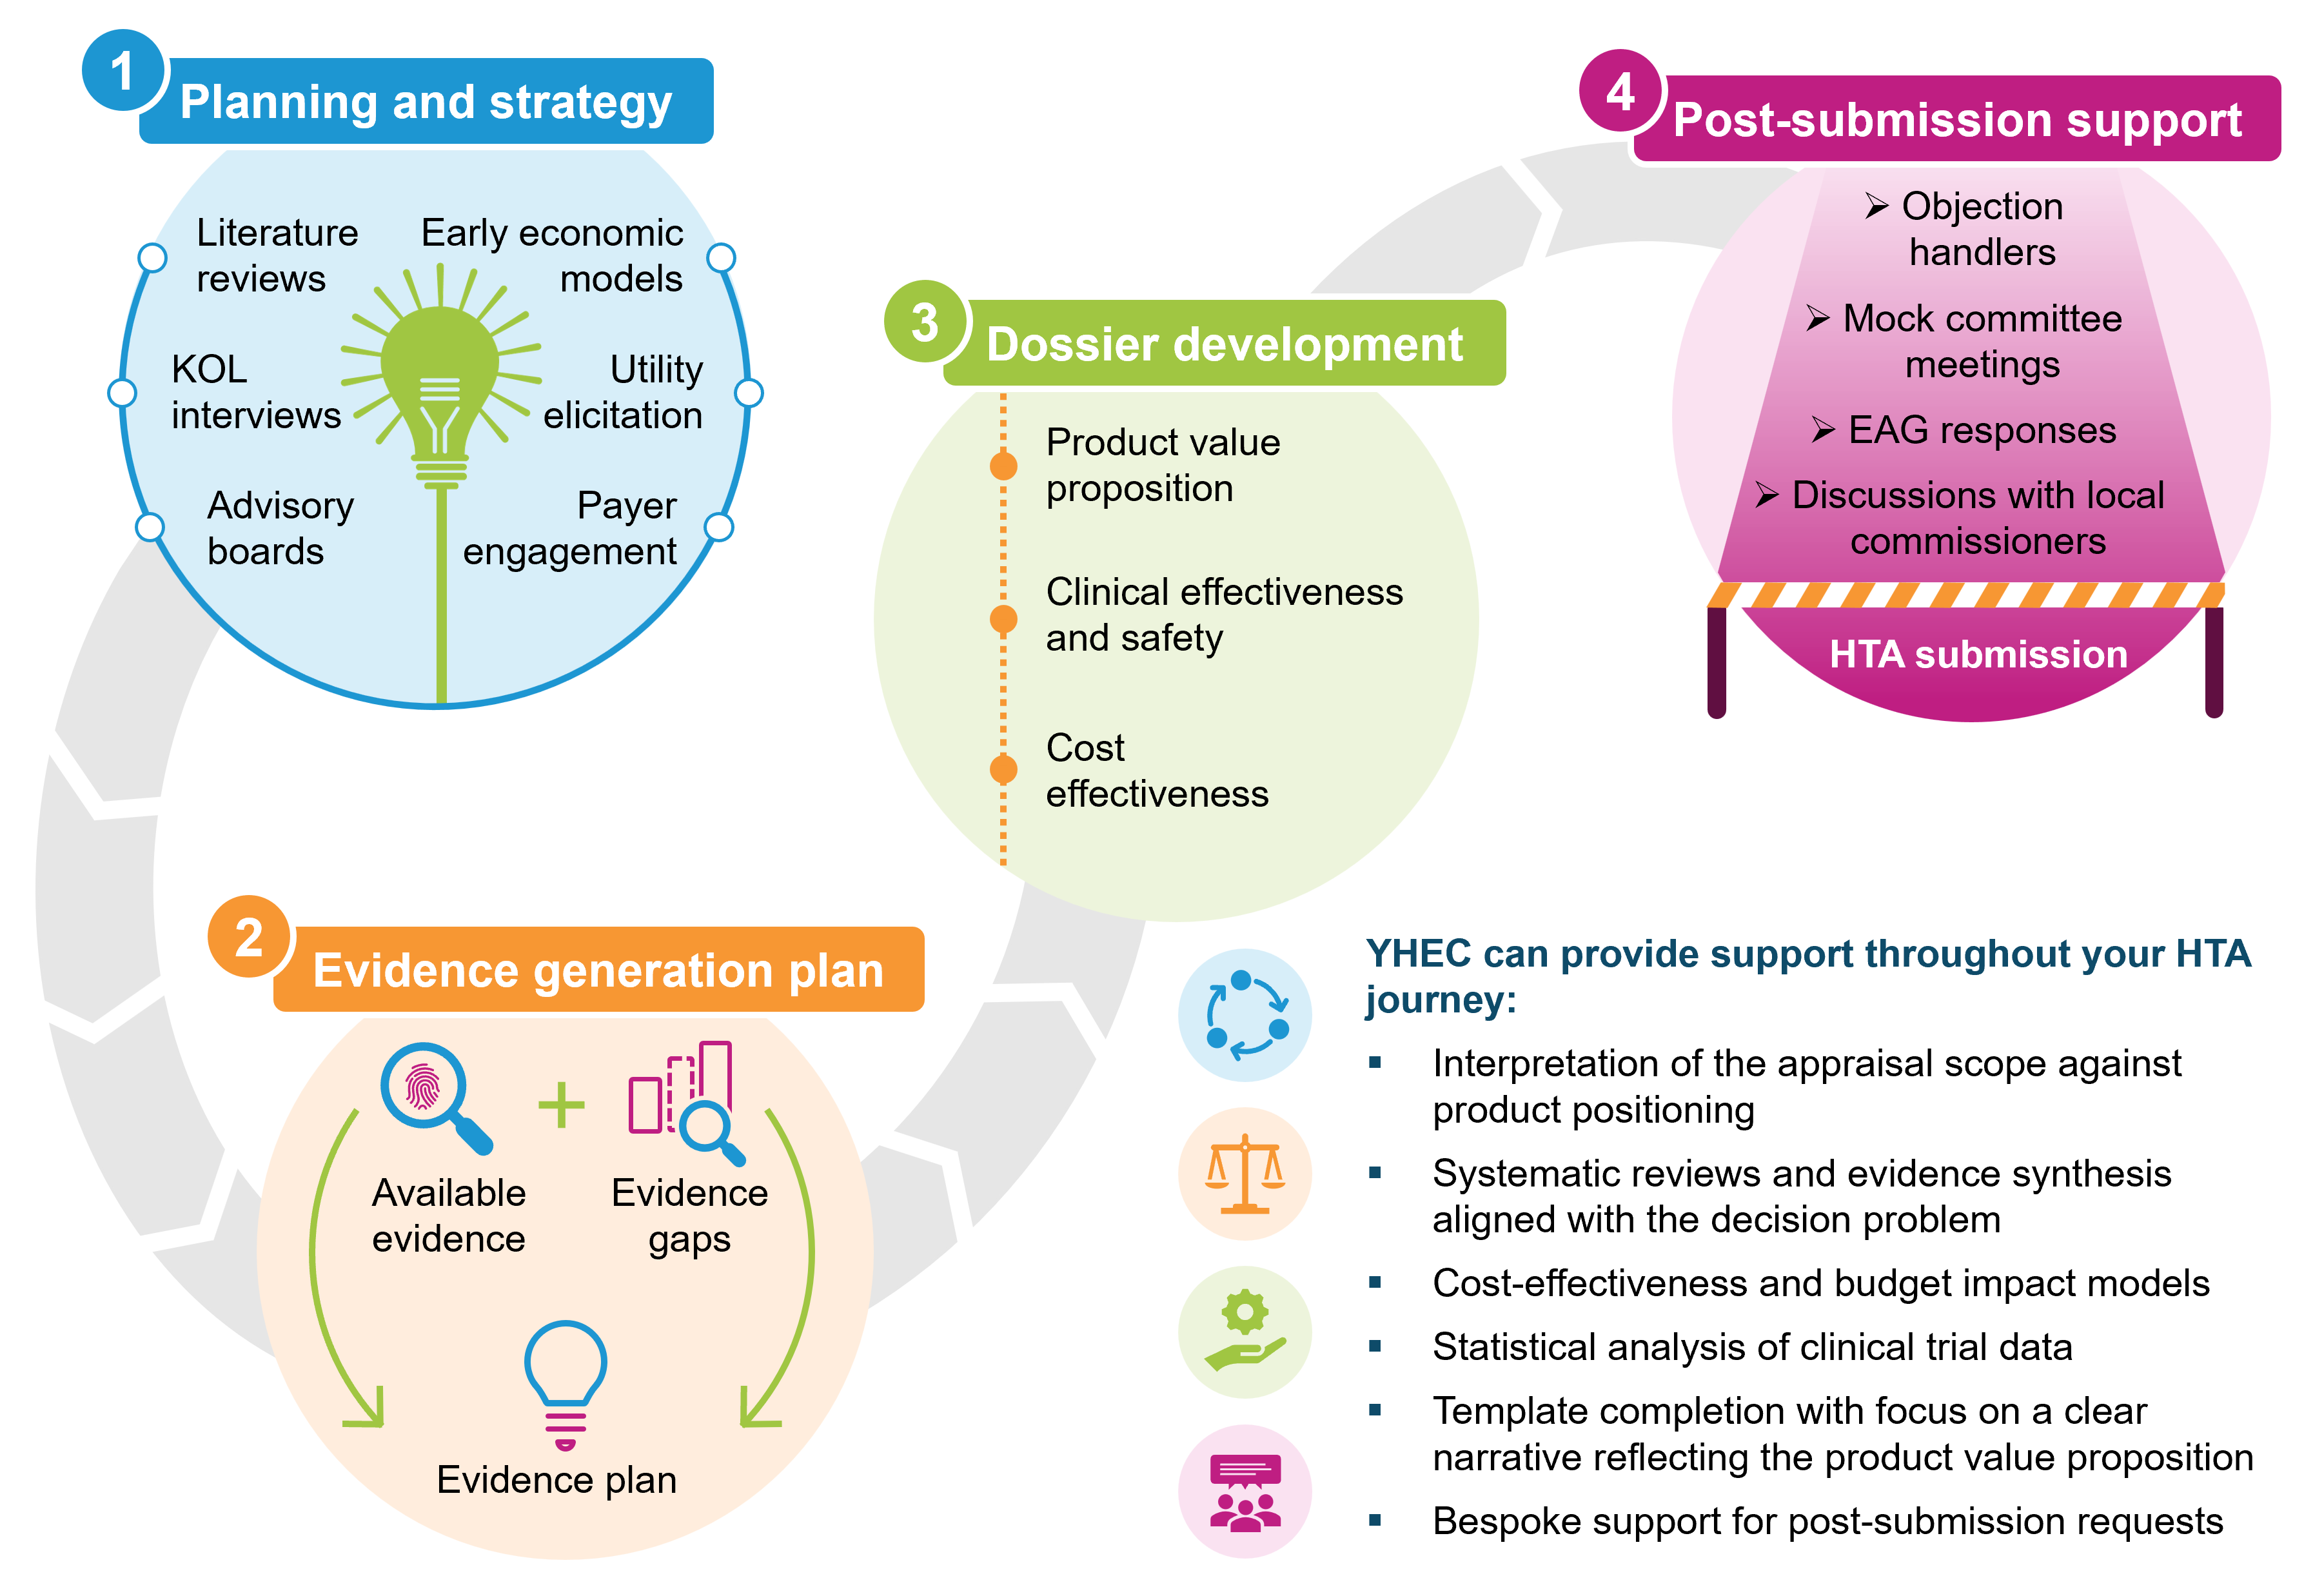 An infographic that describes the four ways that YHEC can support a full HTA submission: 1) planning and strategy, 2) evidence generation plan, 3) dossier develoment, 4) post-submission support